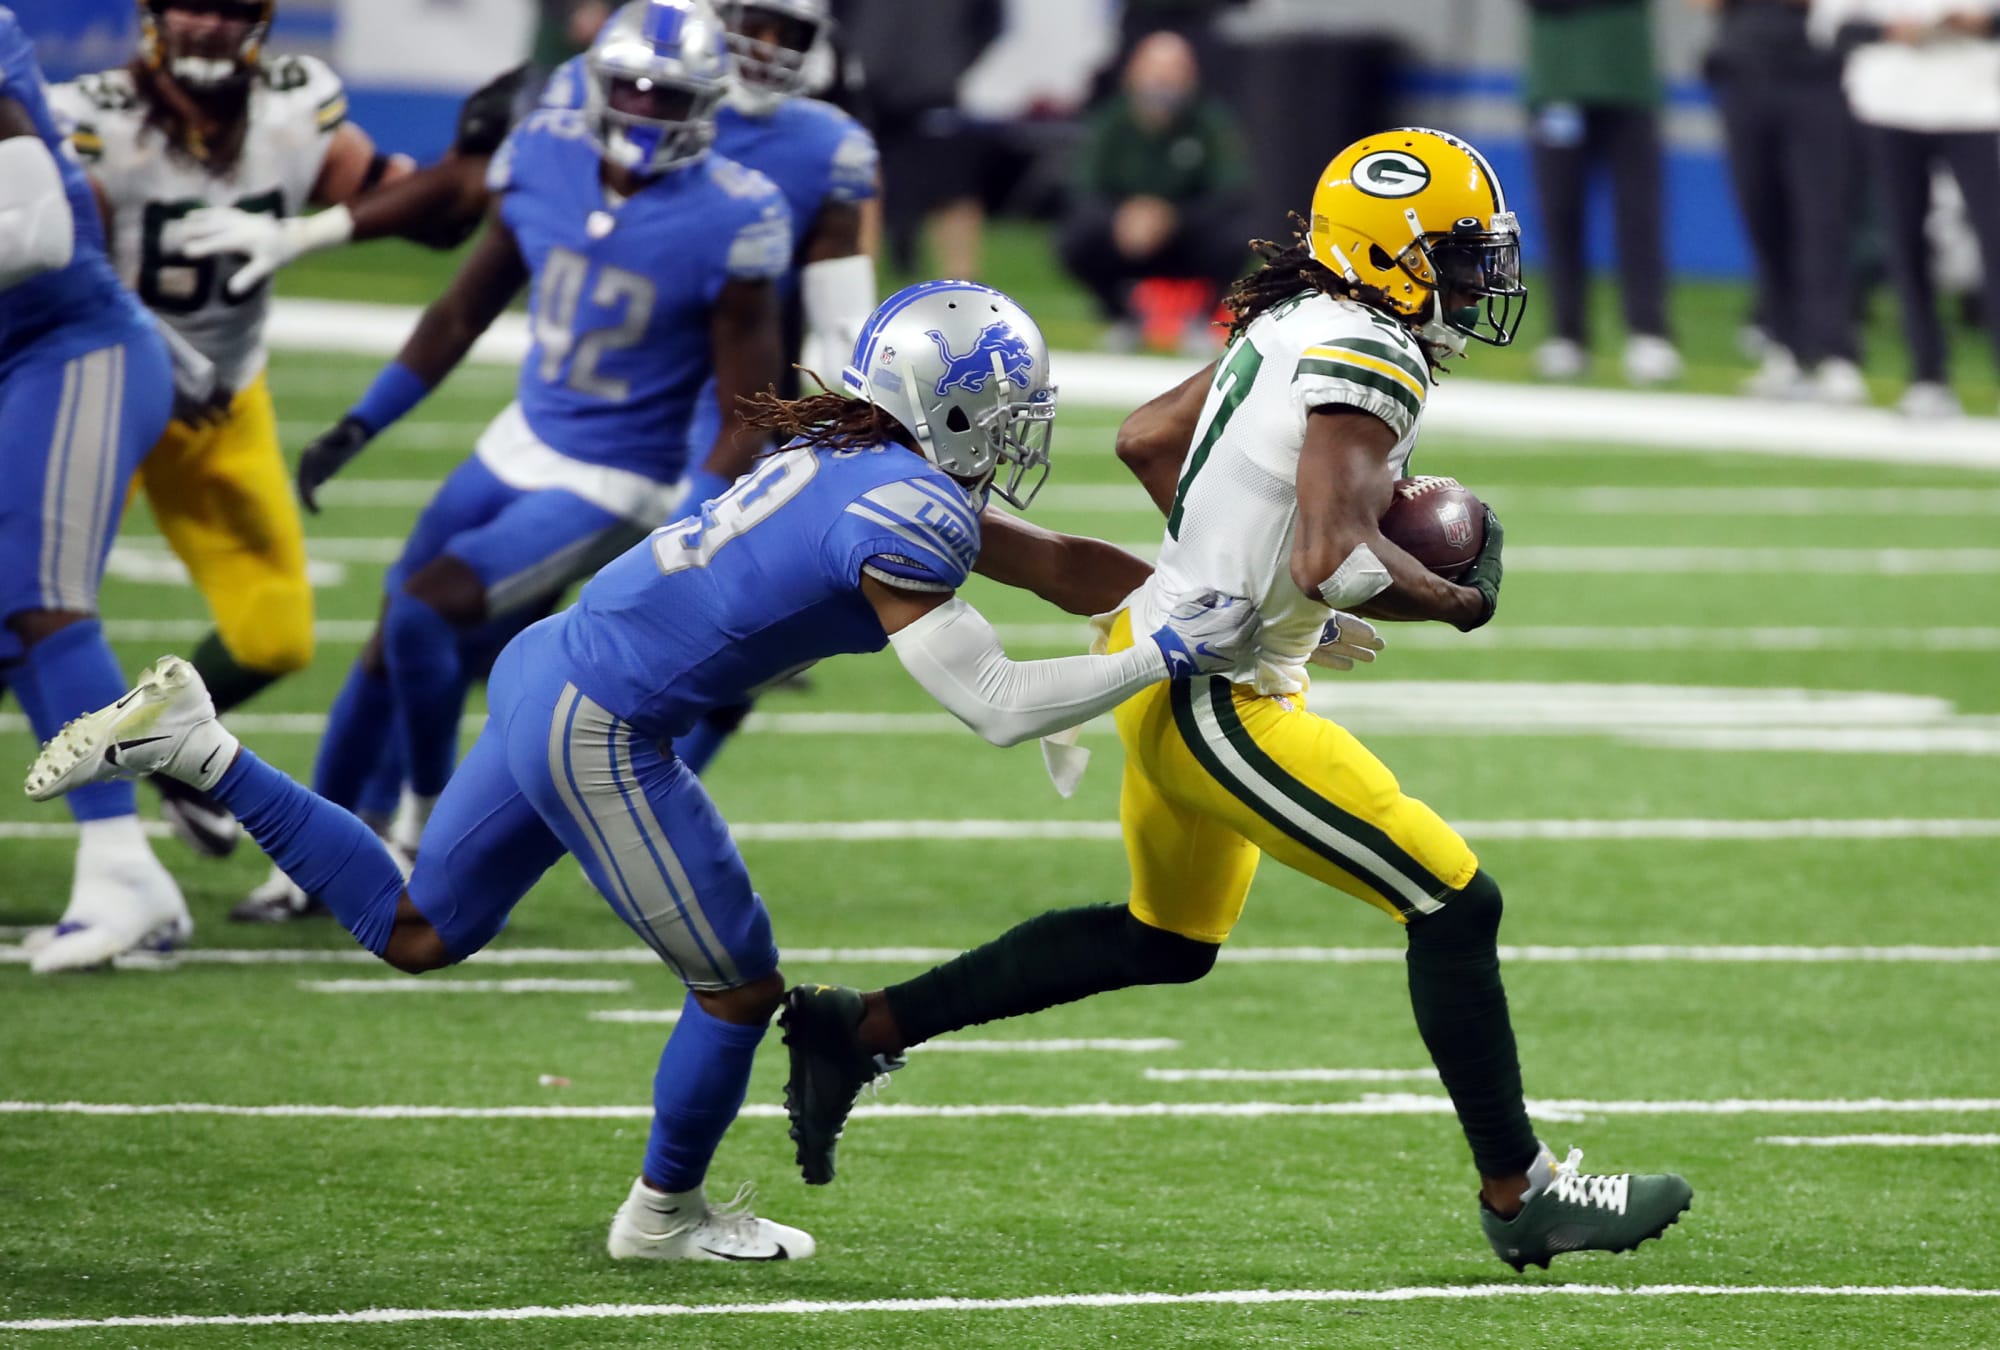 Packers Game Today: Packers-Lions injury report, spread, over/under, schedule, live stream, TV channel